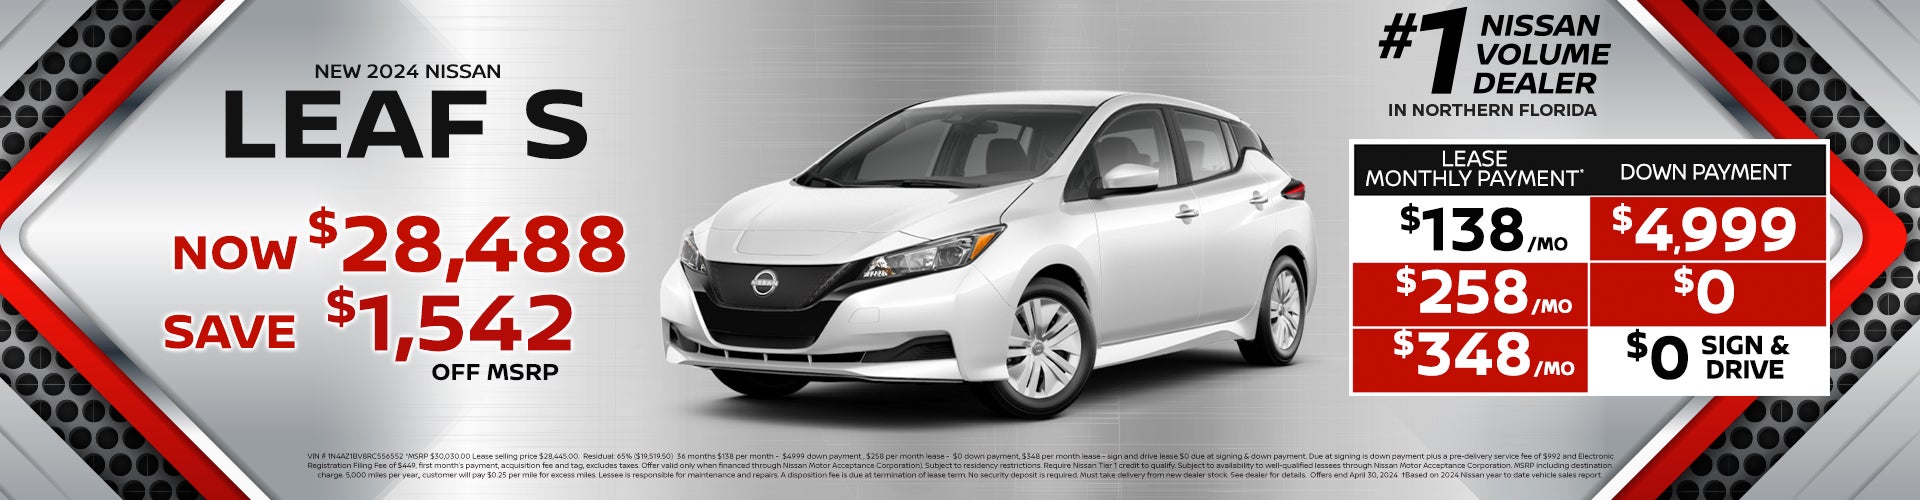 2024 Leaf Lease for as low as $138 per month